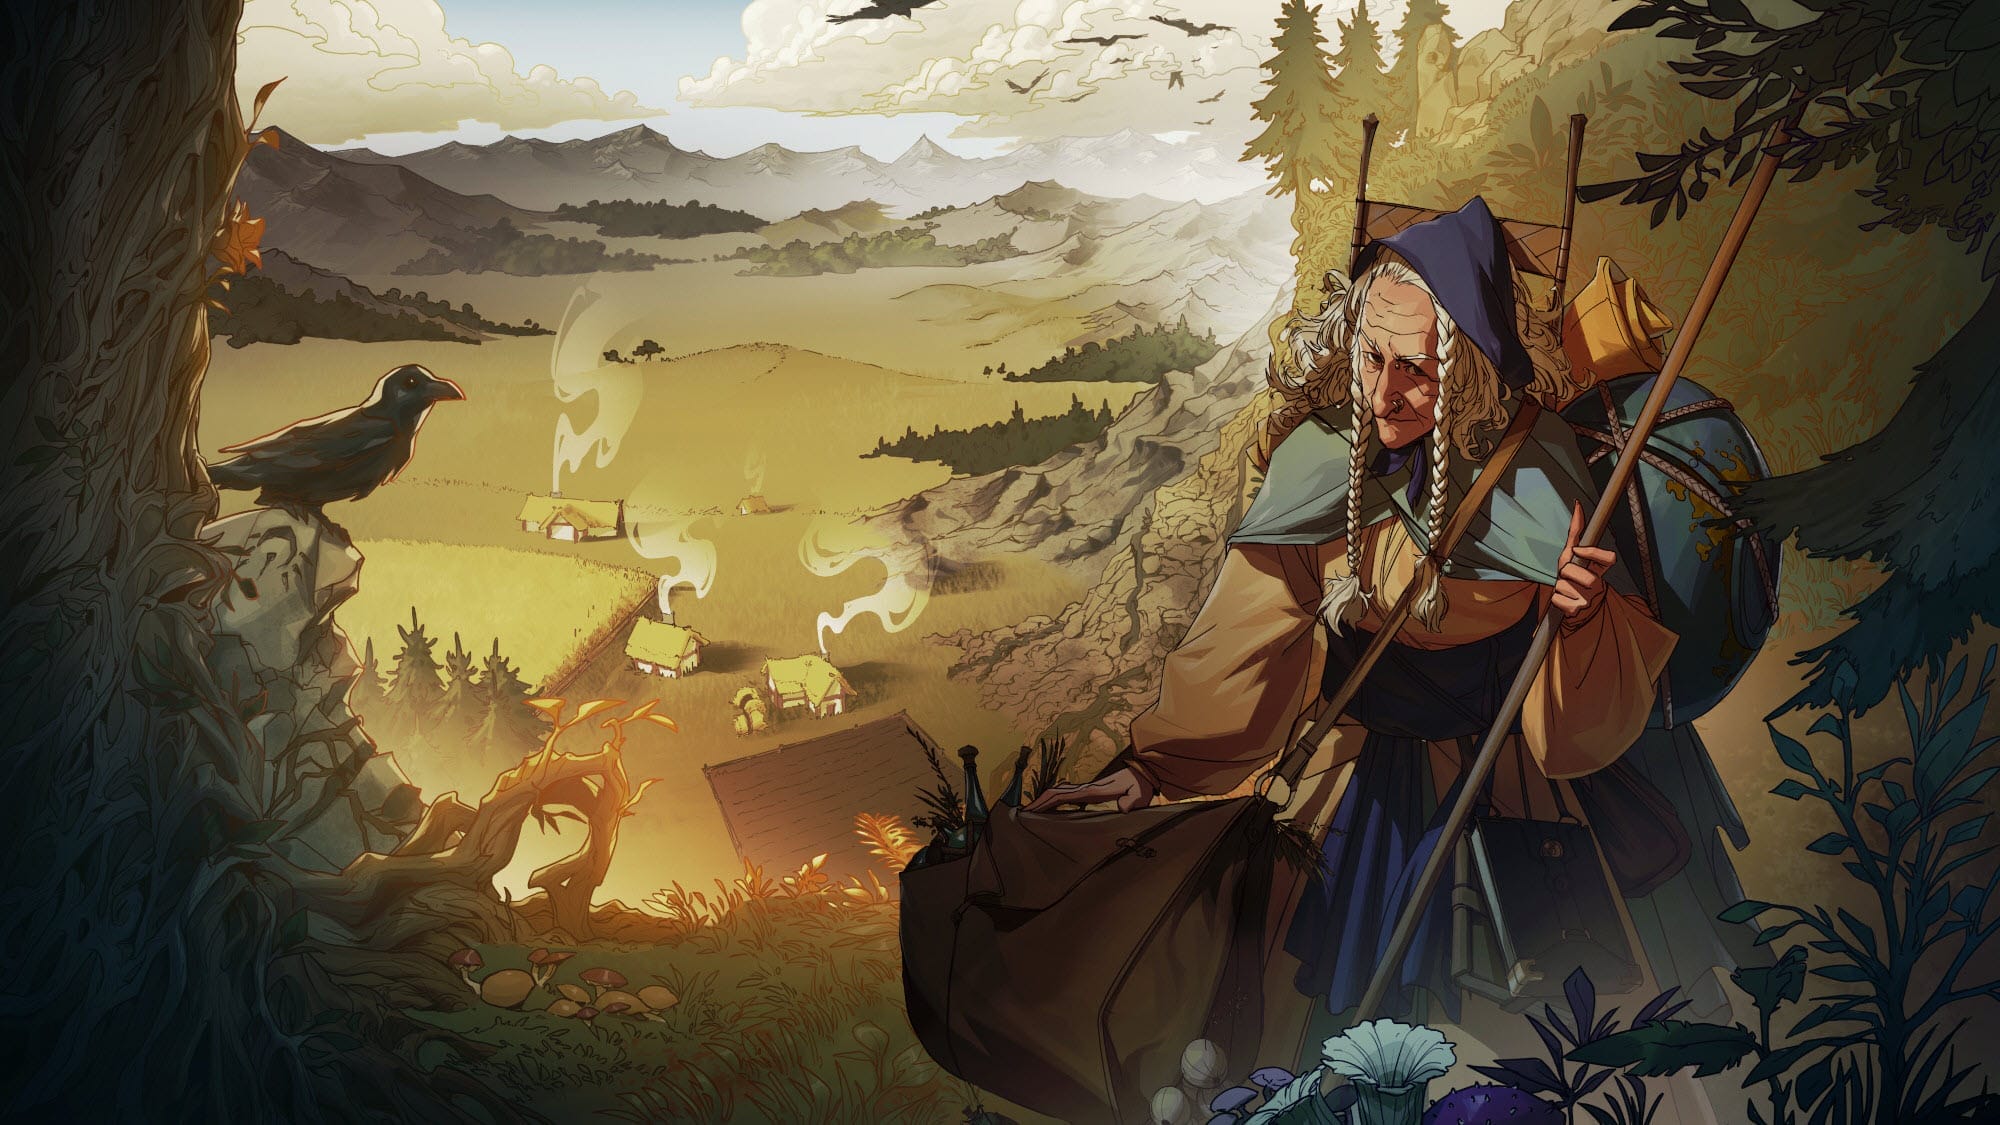 Legend in the Mist key art - a wise person on the road overlooking a village